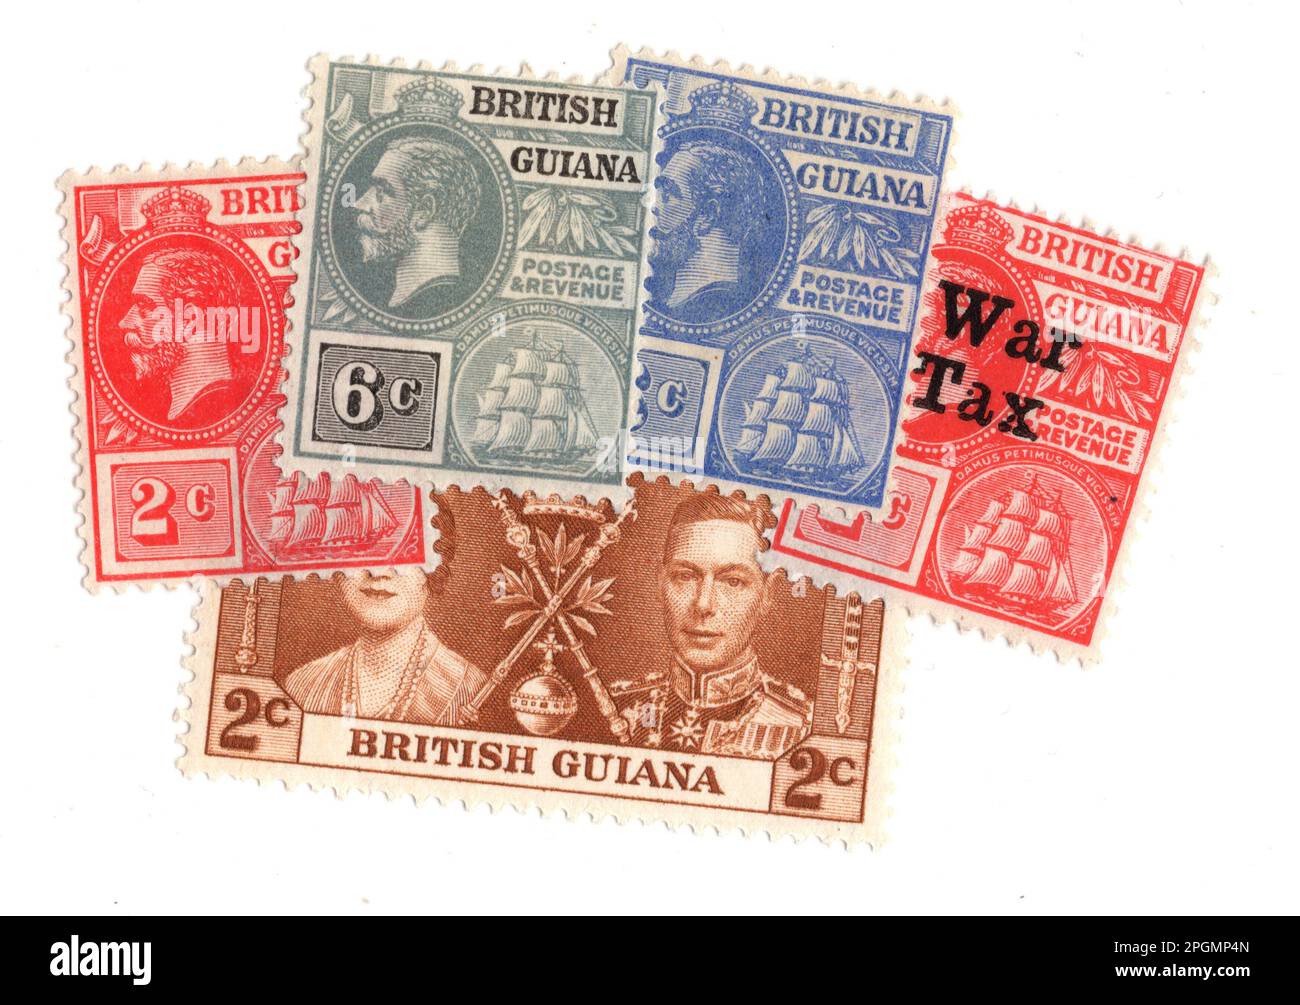 Vintage mint postage stamps from British Guiana isolated on a white background. Stock Photo